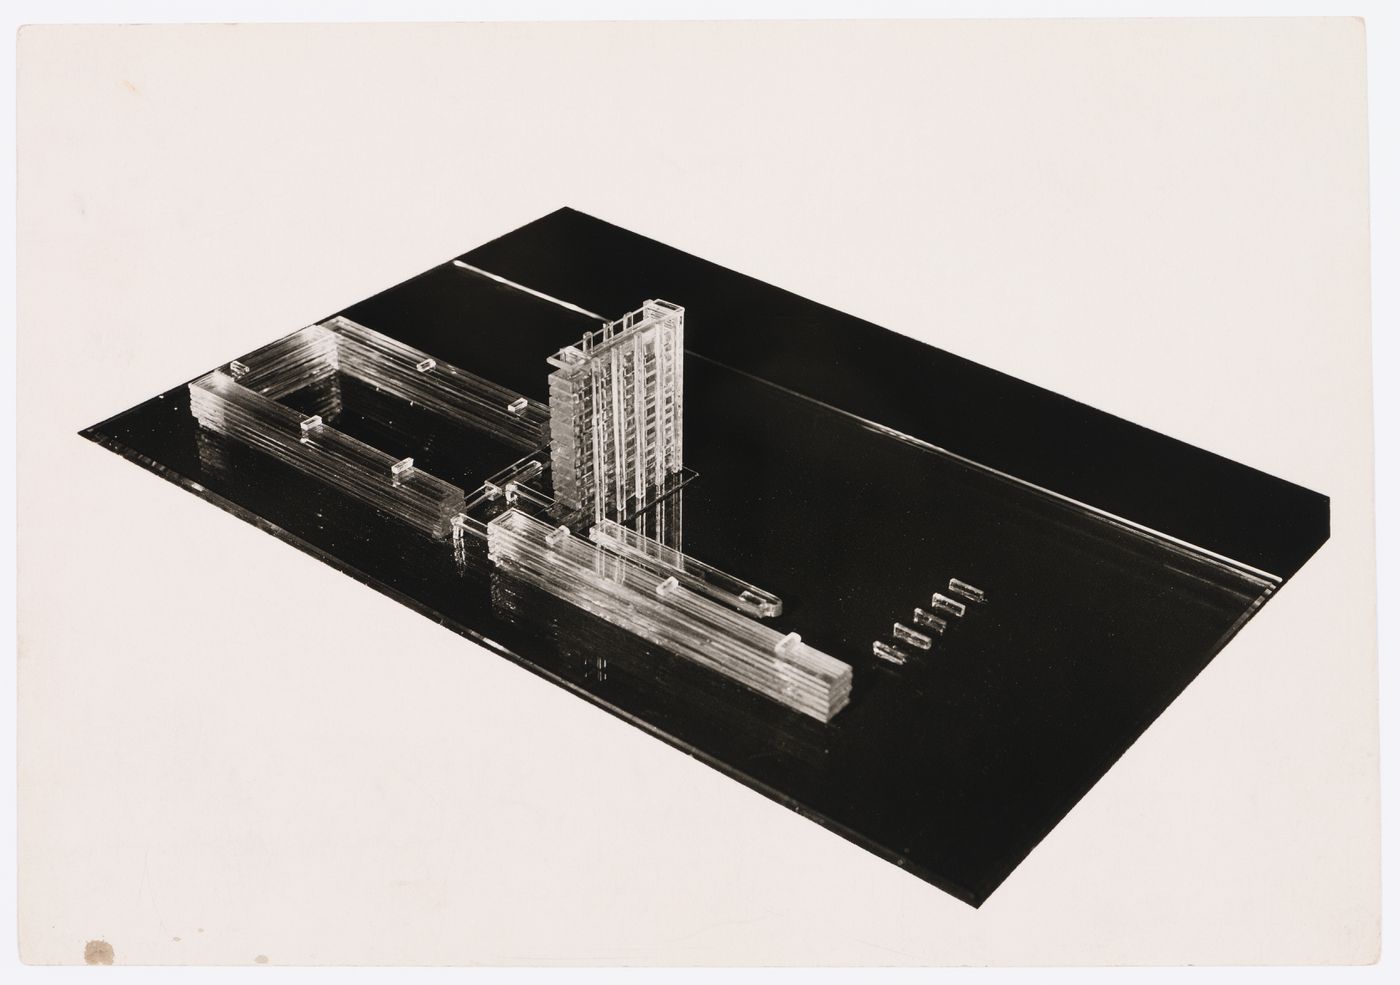 Photograph of a glass model for the Building of Industry, Sverdlovsk, Soviet Union (now Ekaterinburg, Russia)